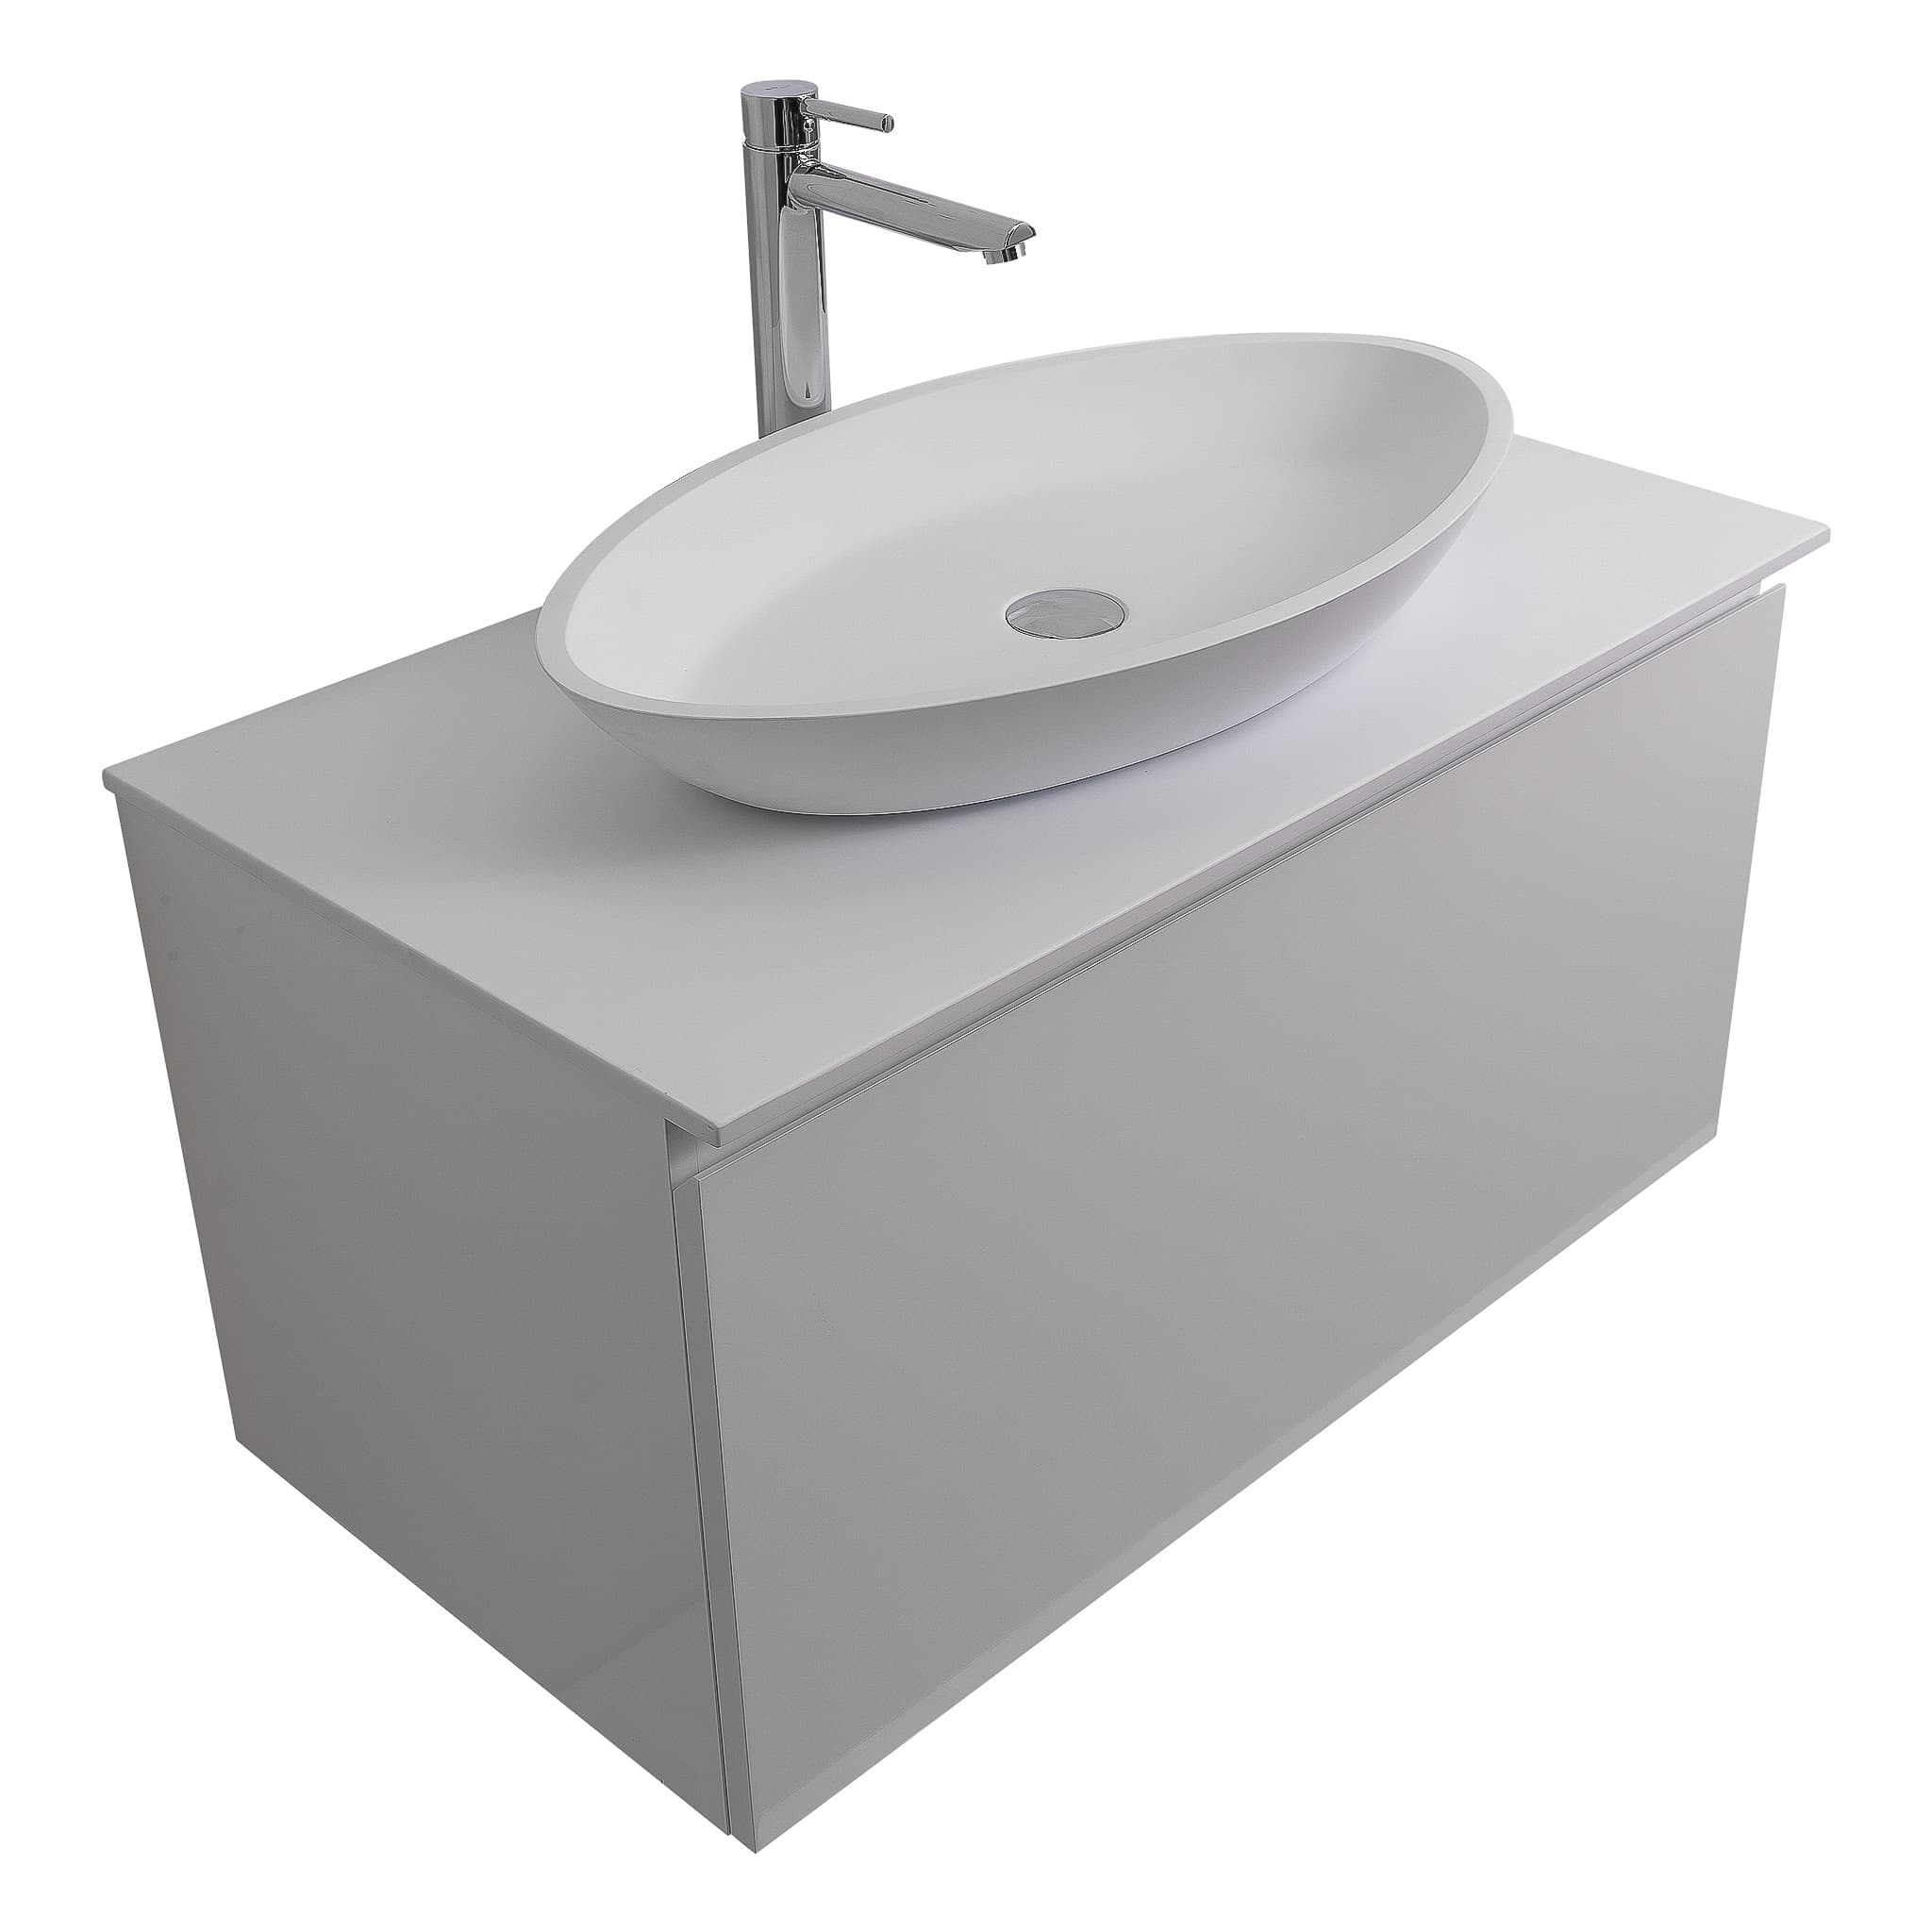 Venice 39.5 White High Gloss Cabinet, Solid Surface Flat White Counter And Oval Solid Surface White Basin 1305, Wall Mounted Modern Vanity Set